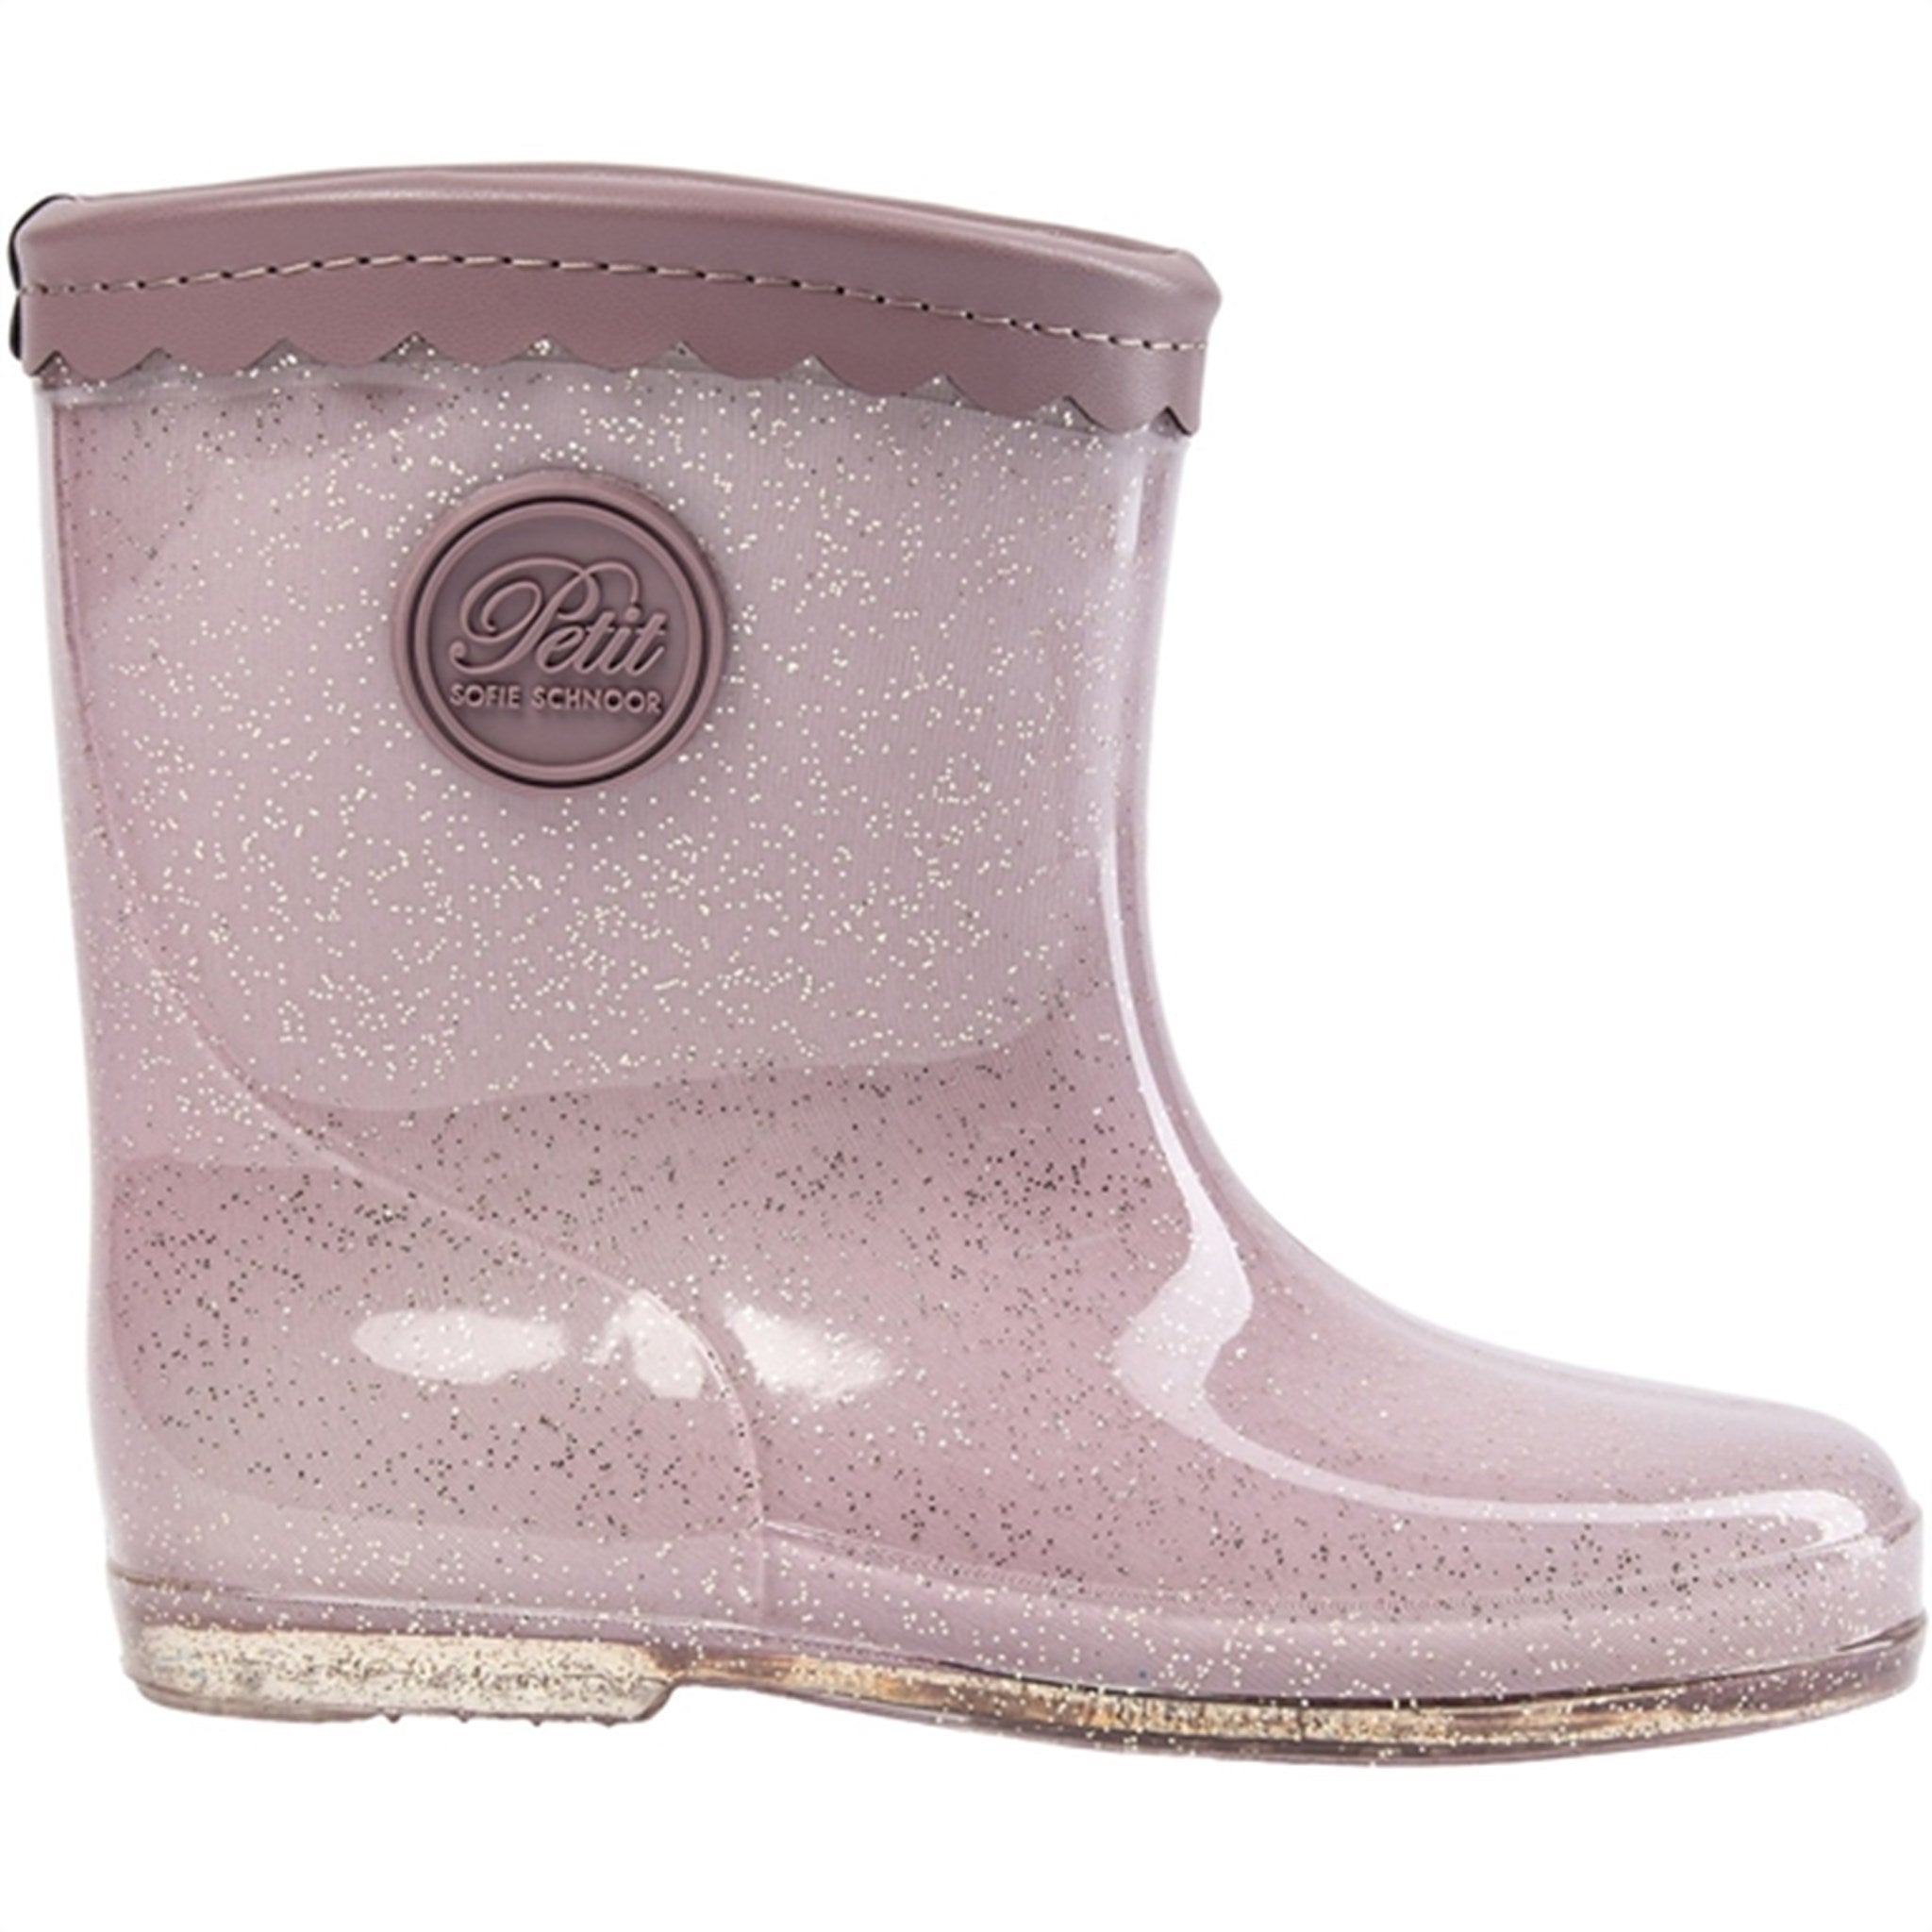 Petit By Sofie Schnoor Light Purple Rubber Boots 5